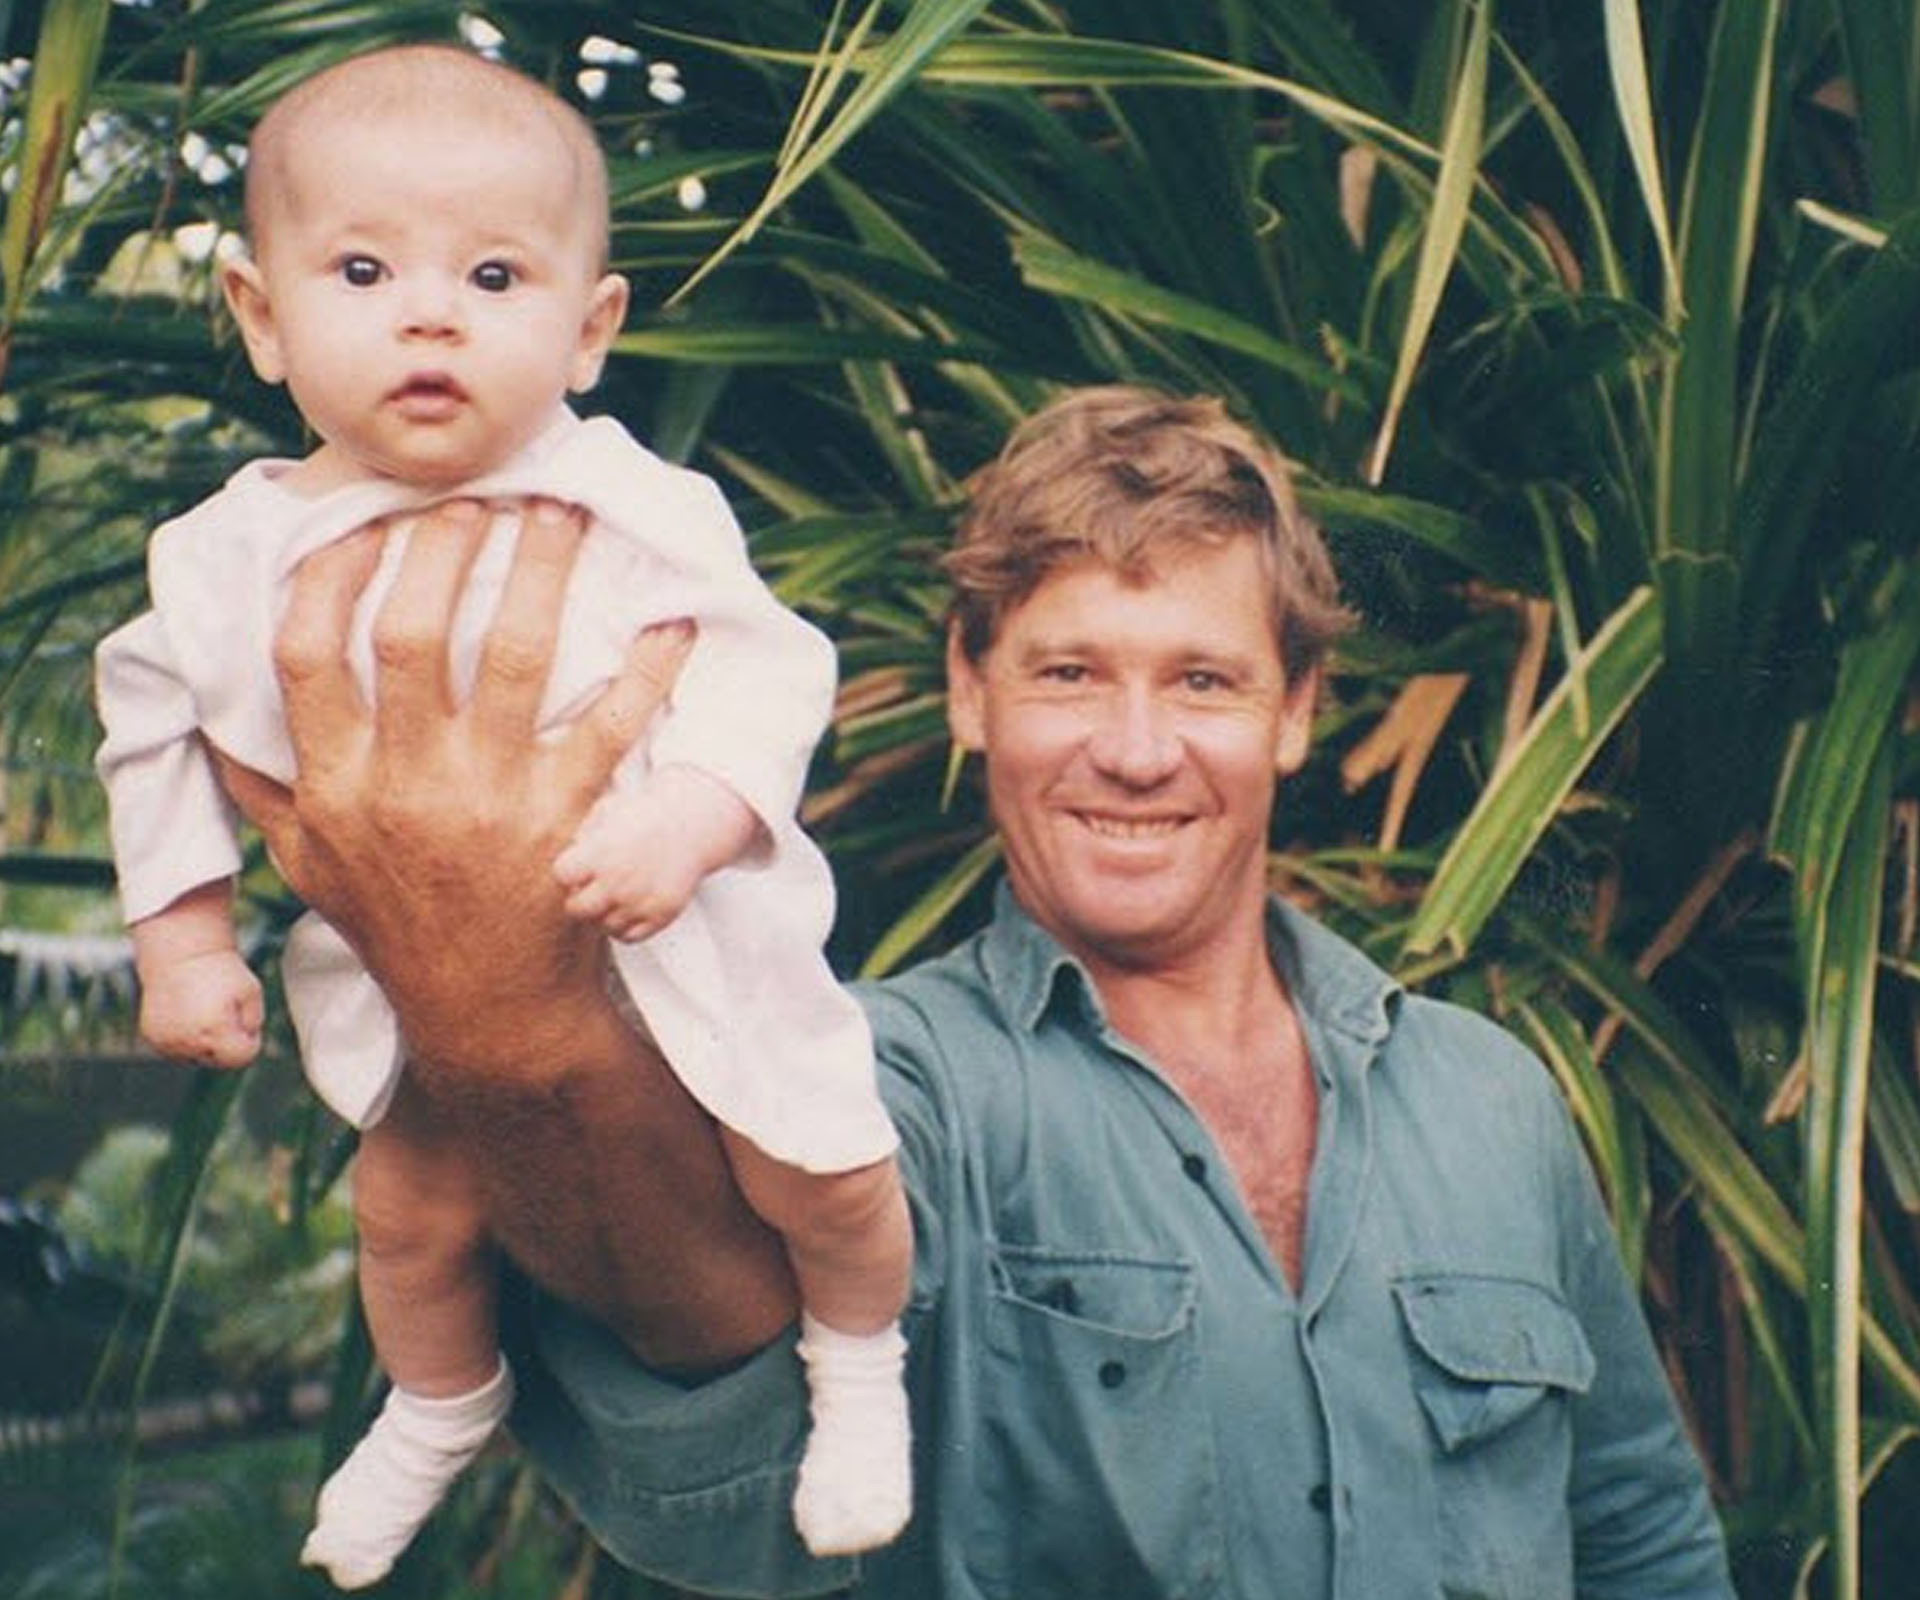 Bindi Irwin posts special message to her dad